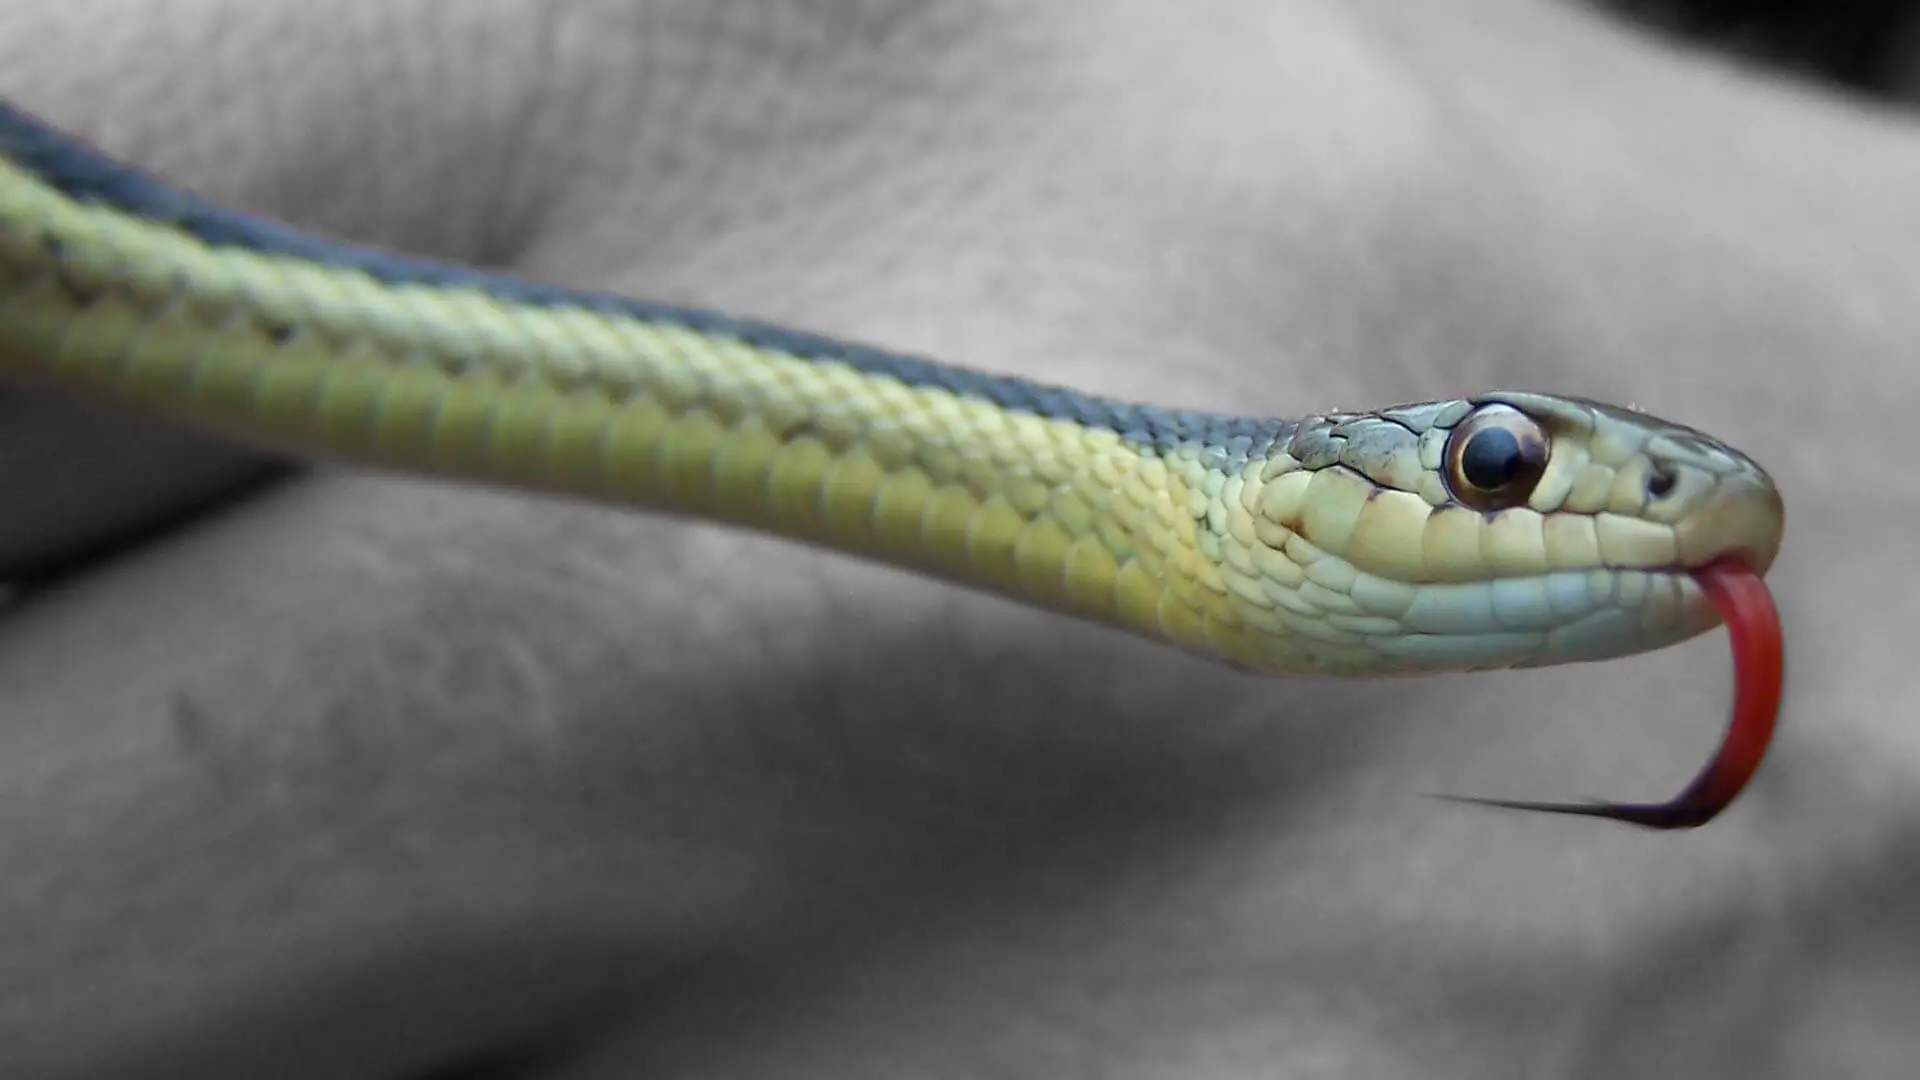 Small green snake with bright red tongue held in someone's hand.